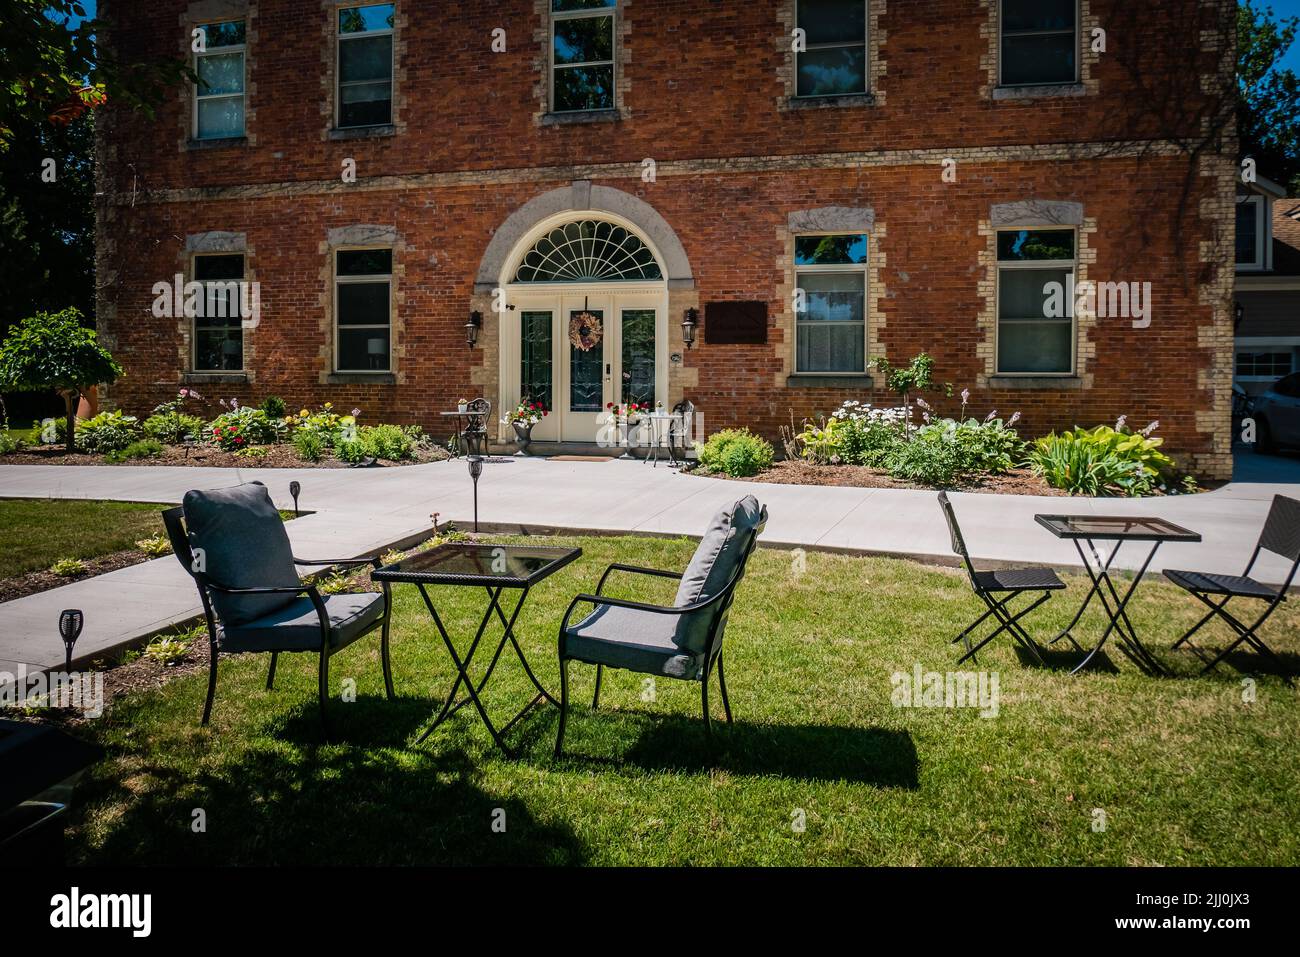 patio furnitures outside of a brickhouse, summer, outdoor,lifestyle Stock Photo